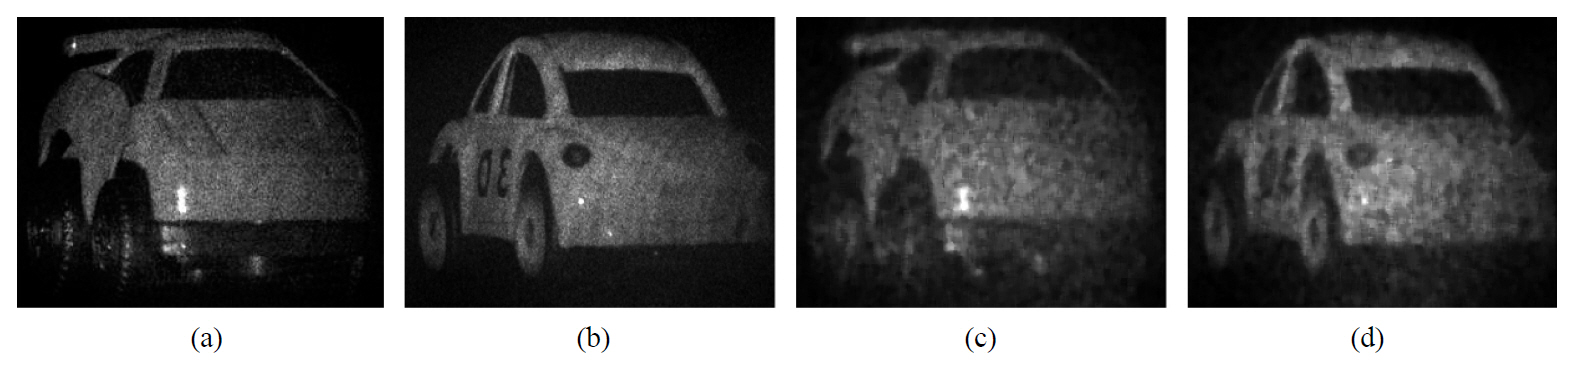 (a)-(b) The reconstructed complex images of toy cars at 880mm from phase-shifting holographic fringe pattern with size of1024×1024 pixels. (a) Car I and (b) car II. (c)-(d) The reconstructed complex images of toy cars at 880mm from phase-shiftingholographic fringe pattern with size of 256×256 pixels. (c) Car I and (d) car II.